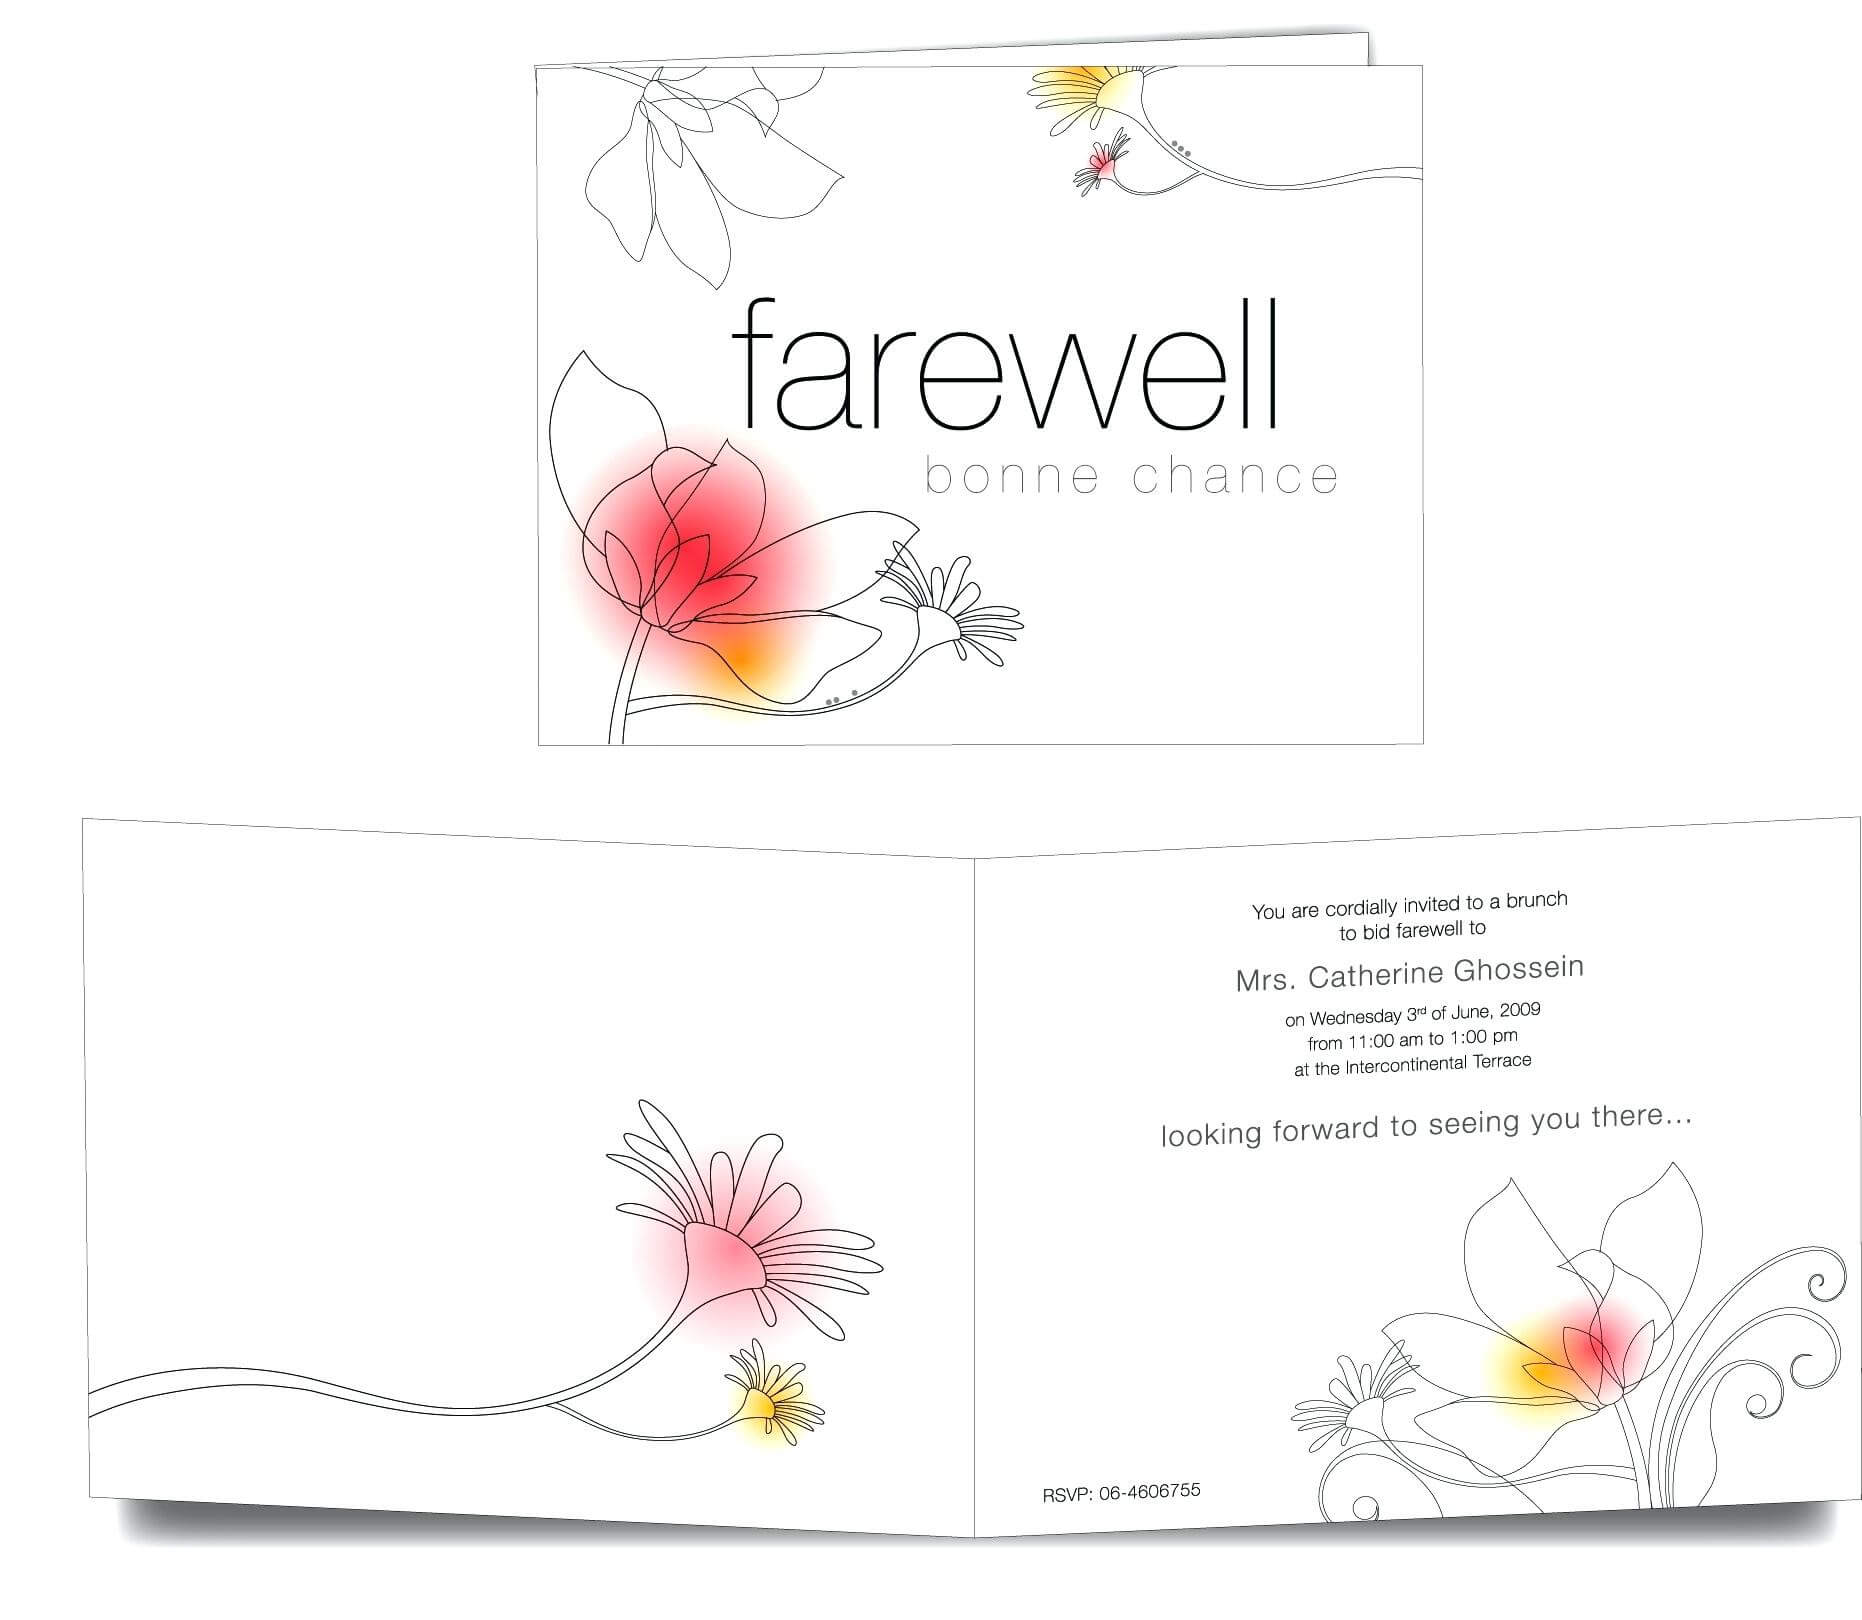 013 Boss Farewell Invitation Daily Motivational Quotes Send Pertaining To Farewell Invitation Card Template